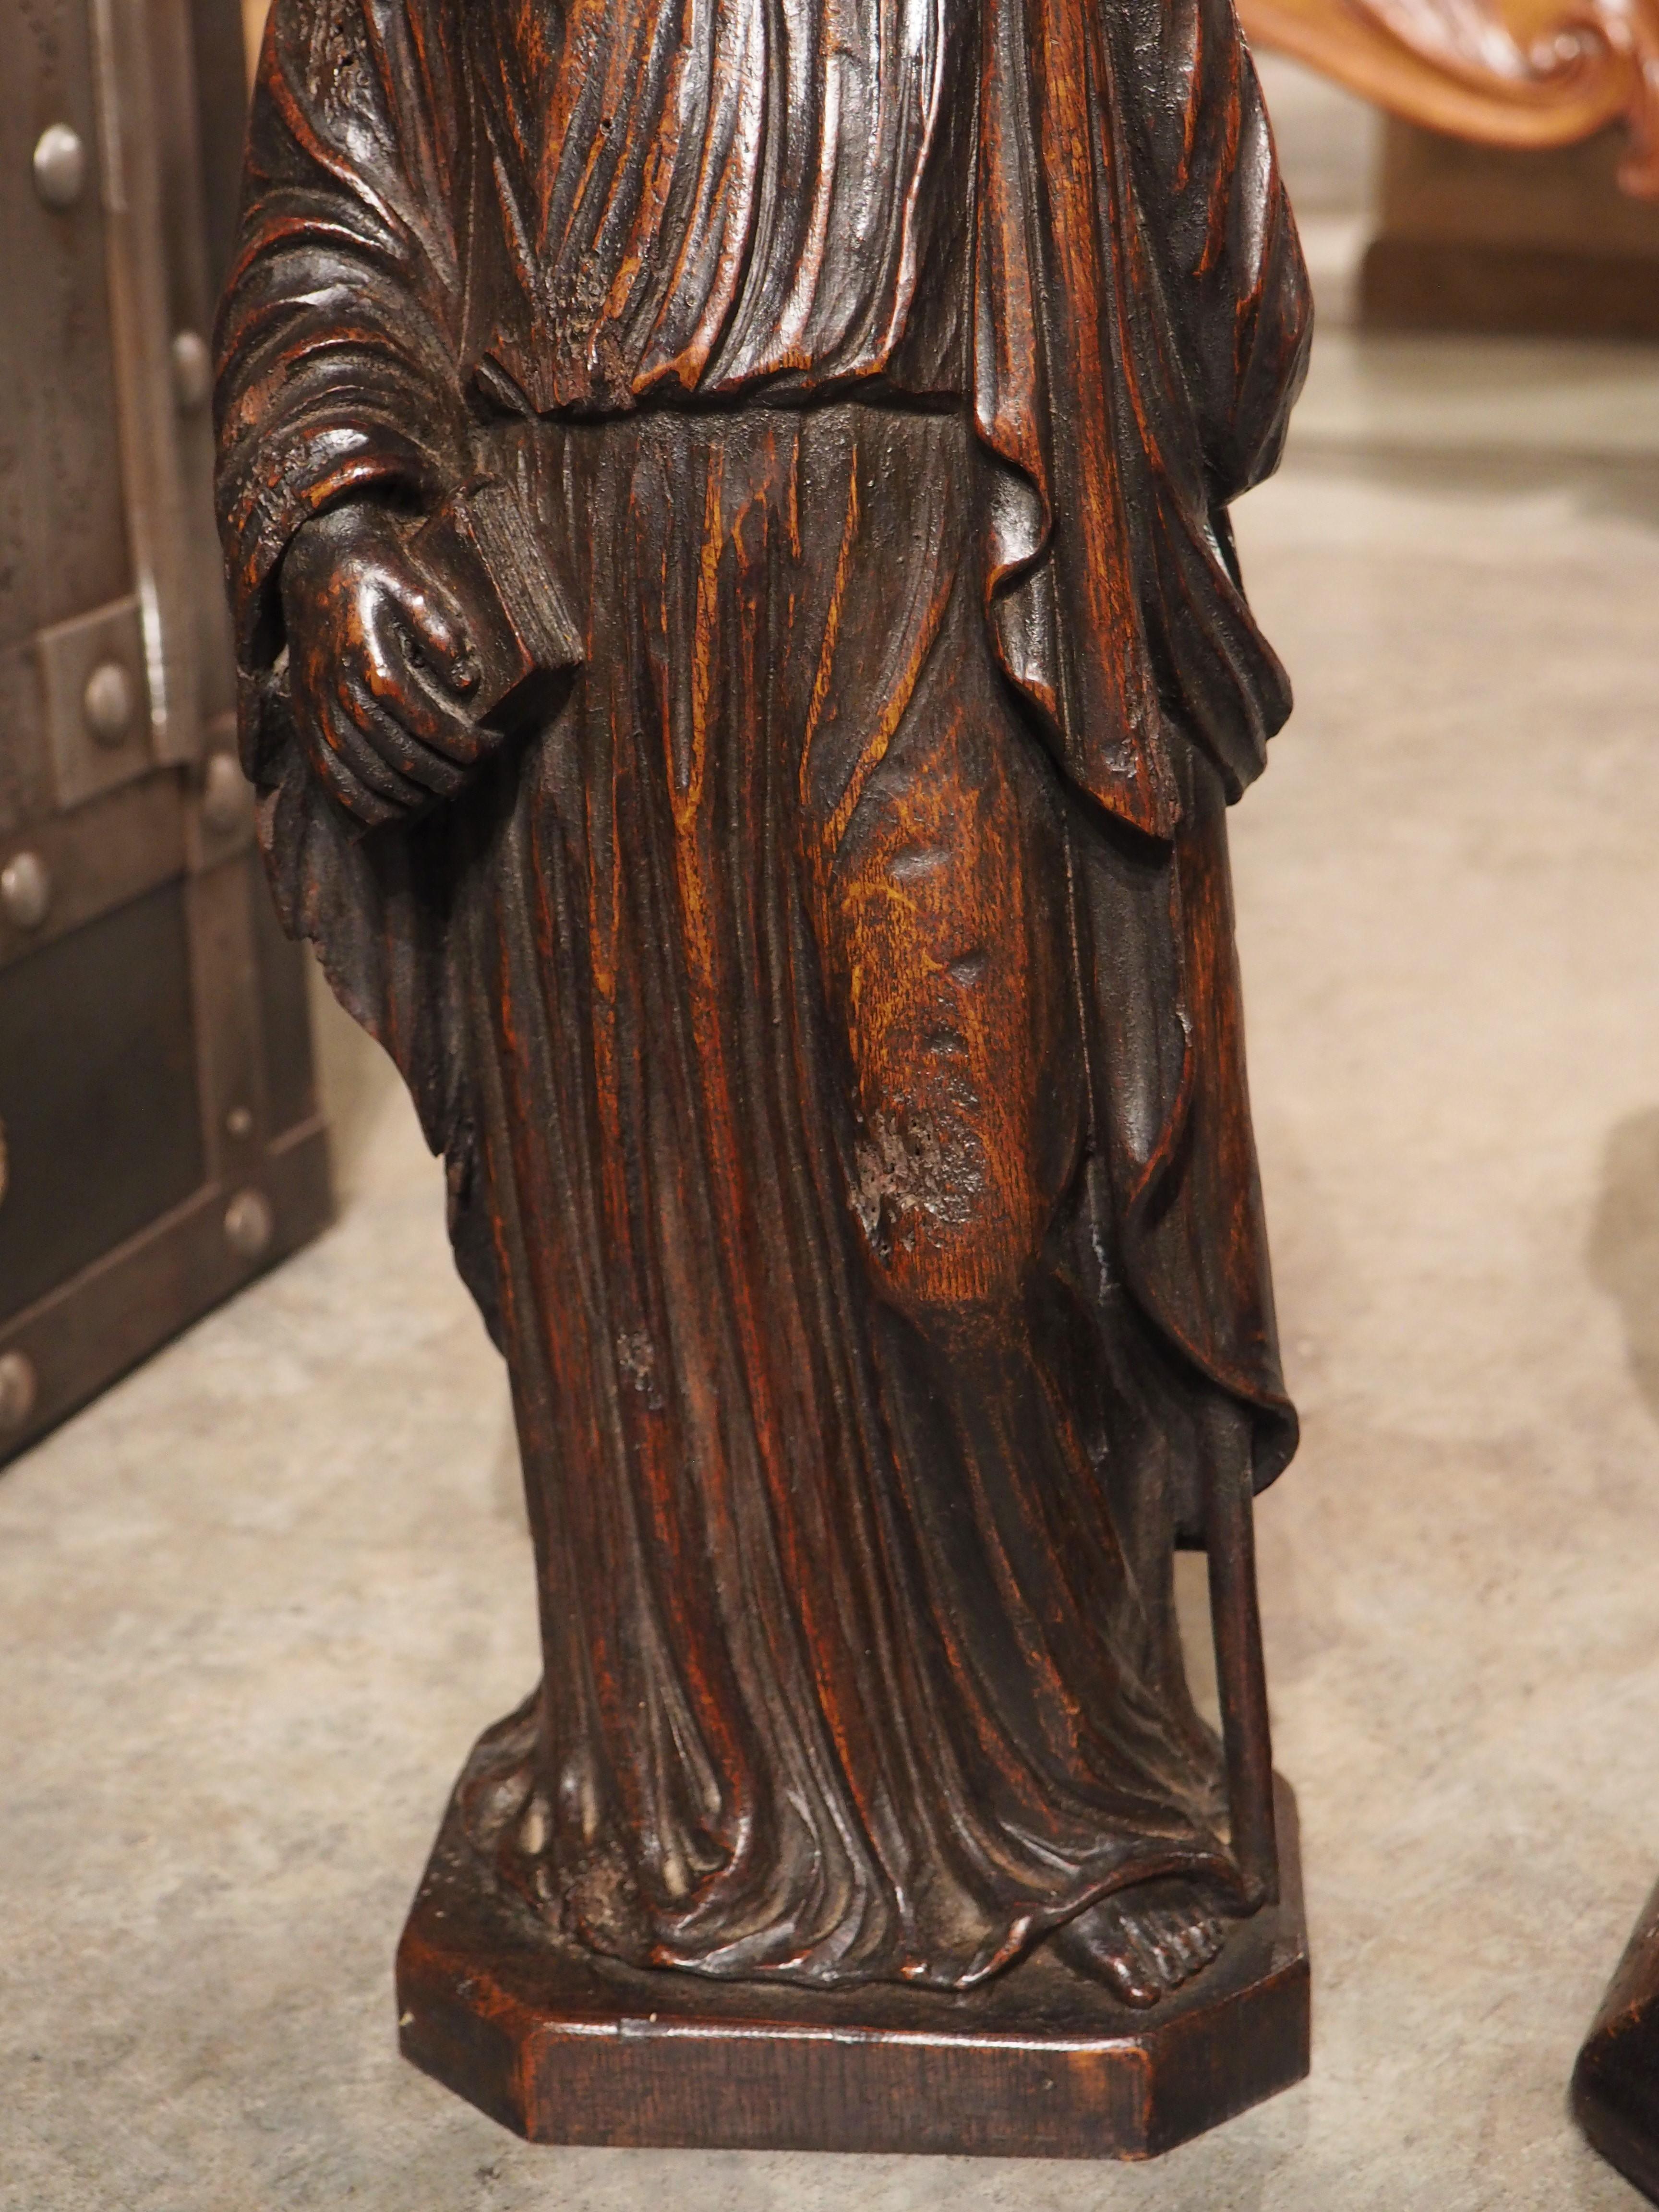 Circa 1800 Carved Oak Sculptures of the Apostles, James, John, Peter, and Paul For Sale 4